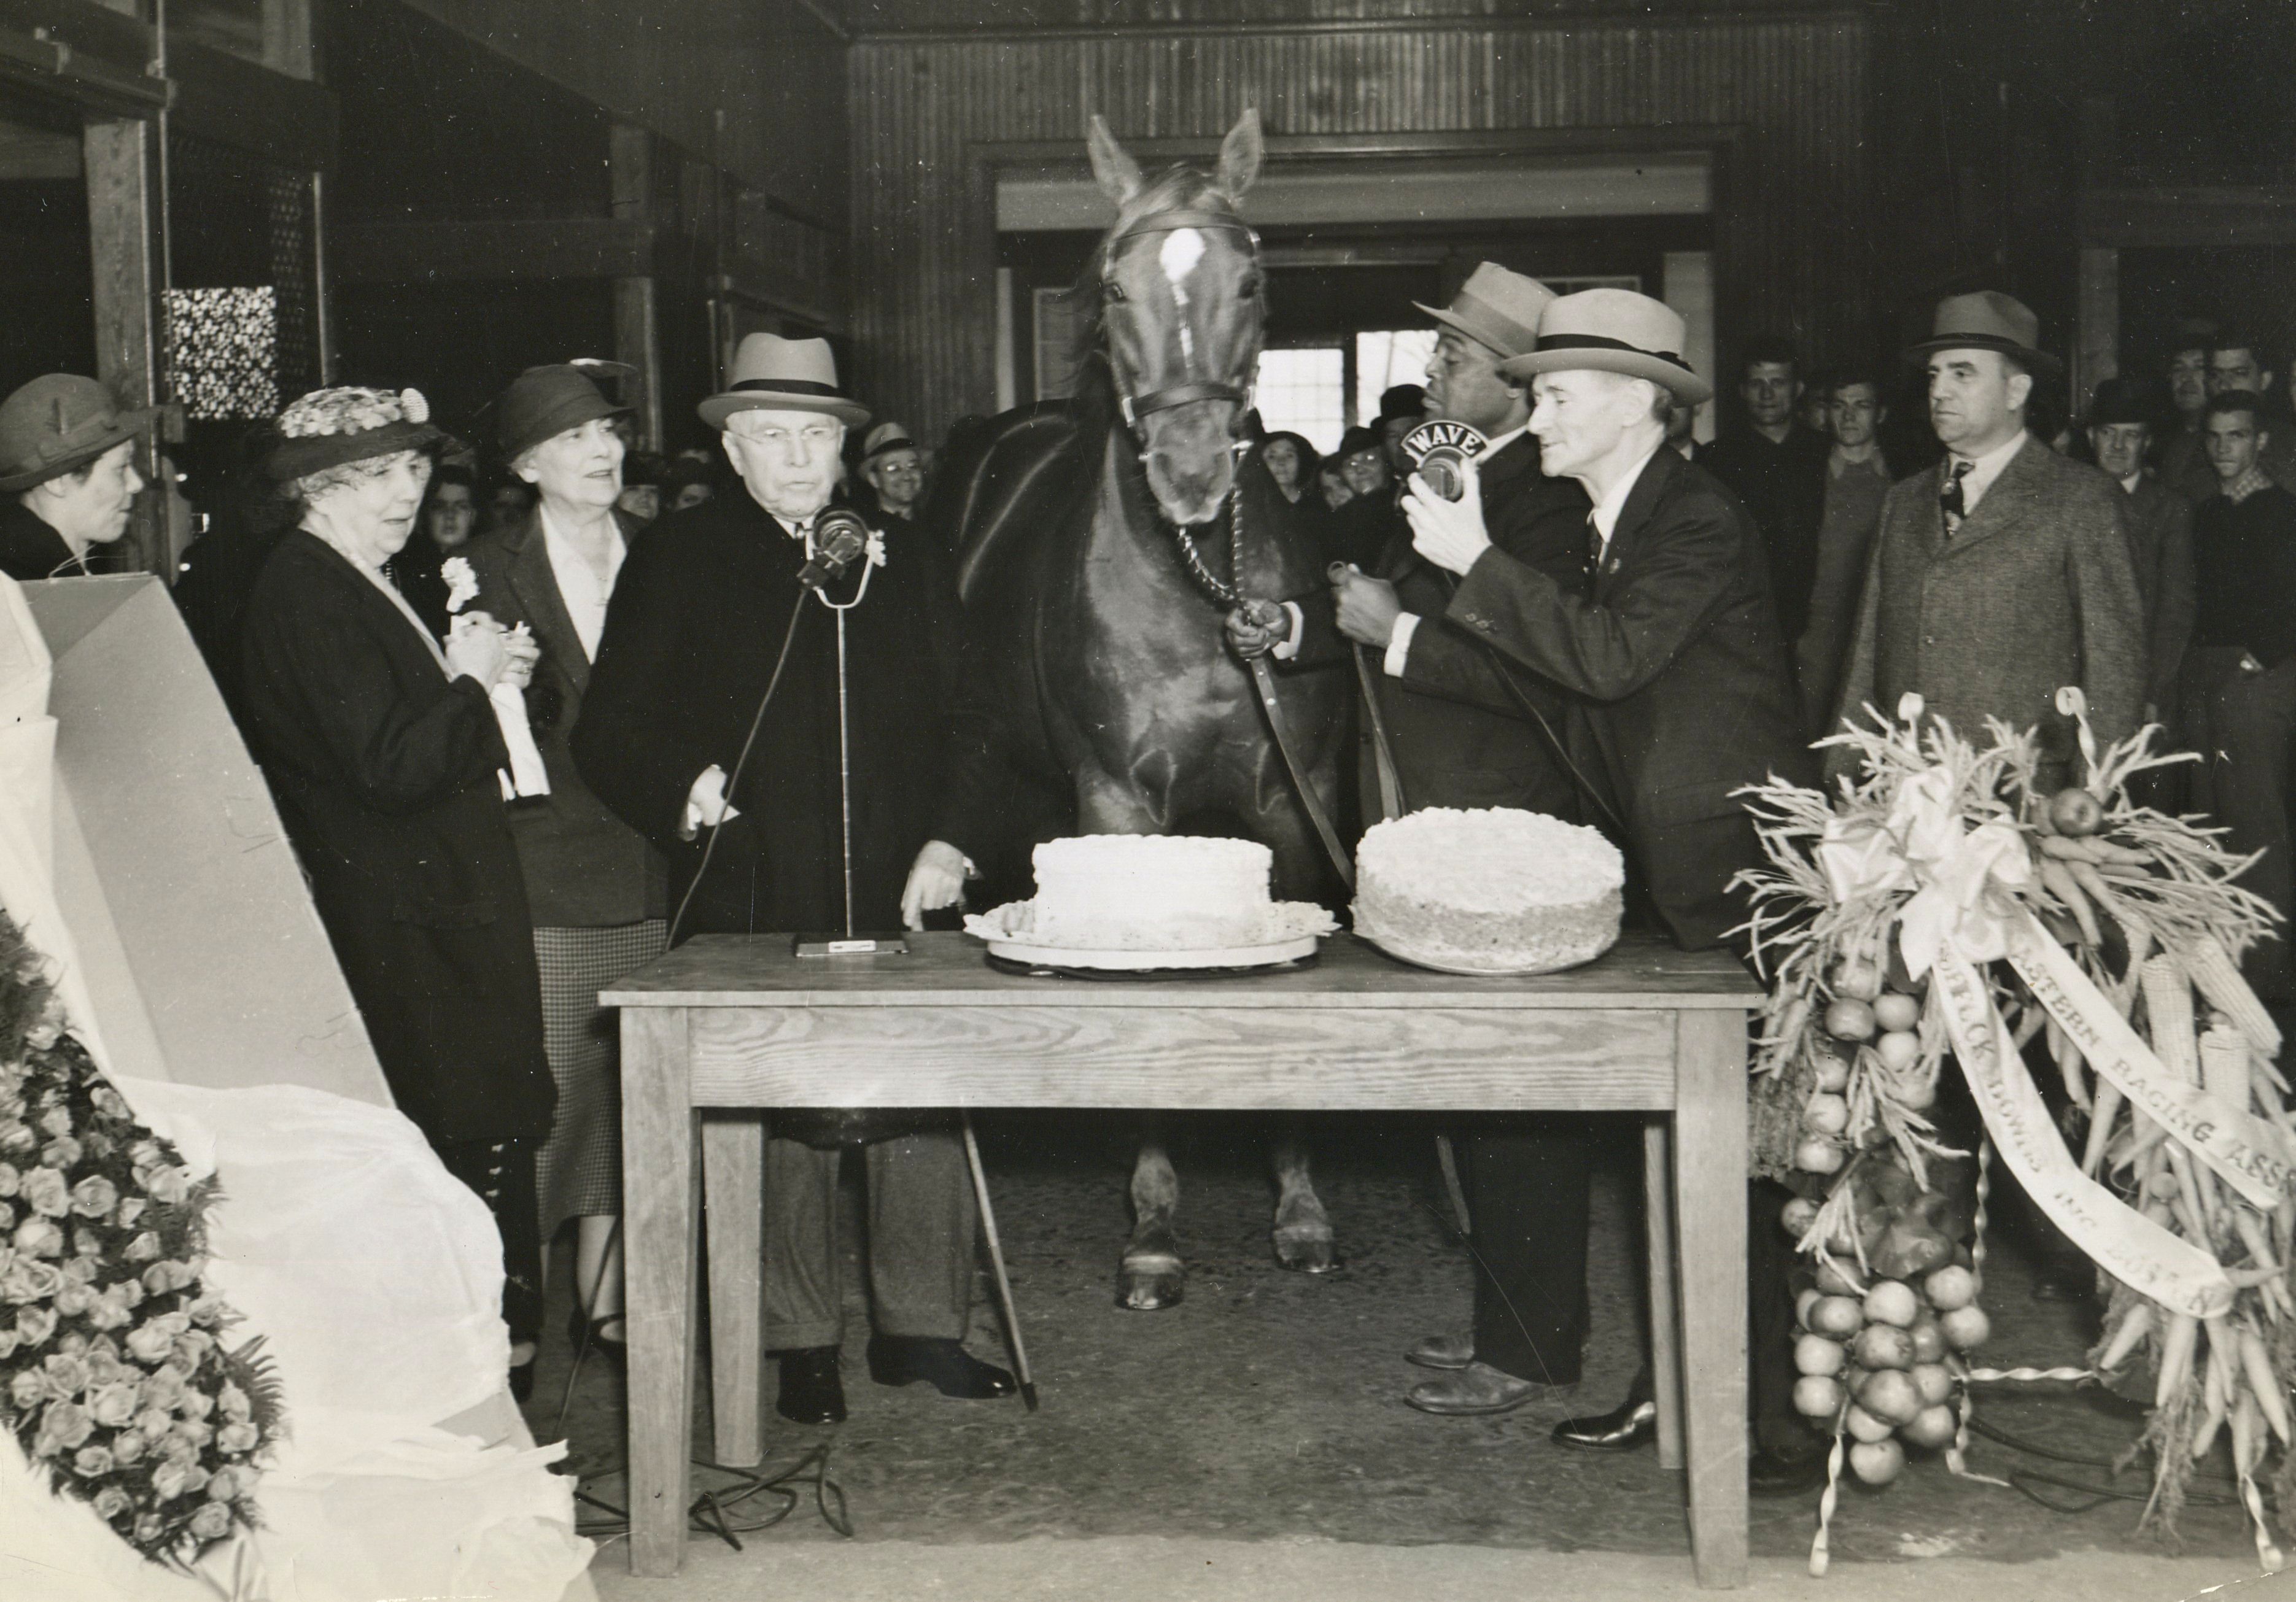 Man o' War being celebrated on his birthday during retirement (TurfPix/Museum Collection)